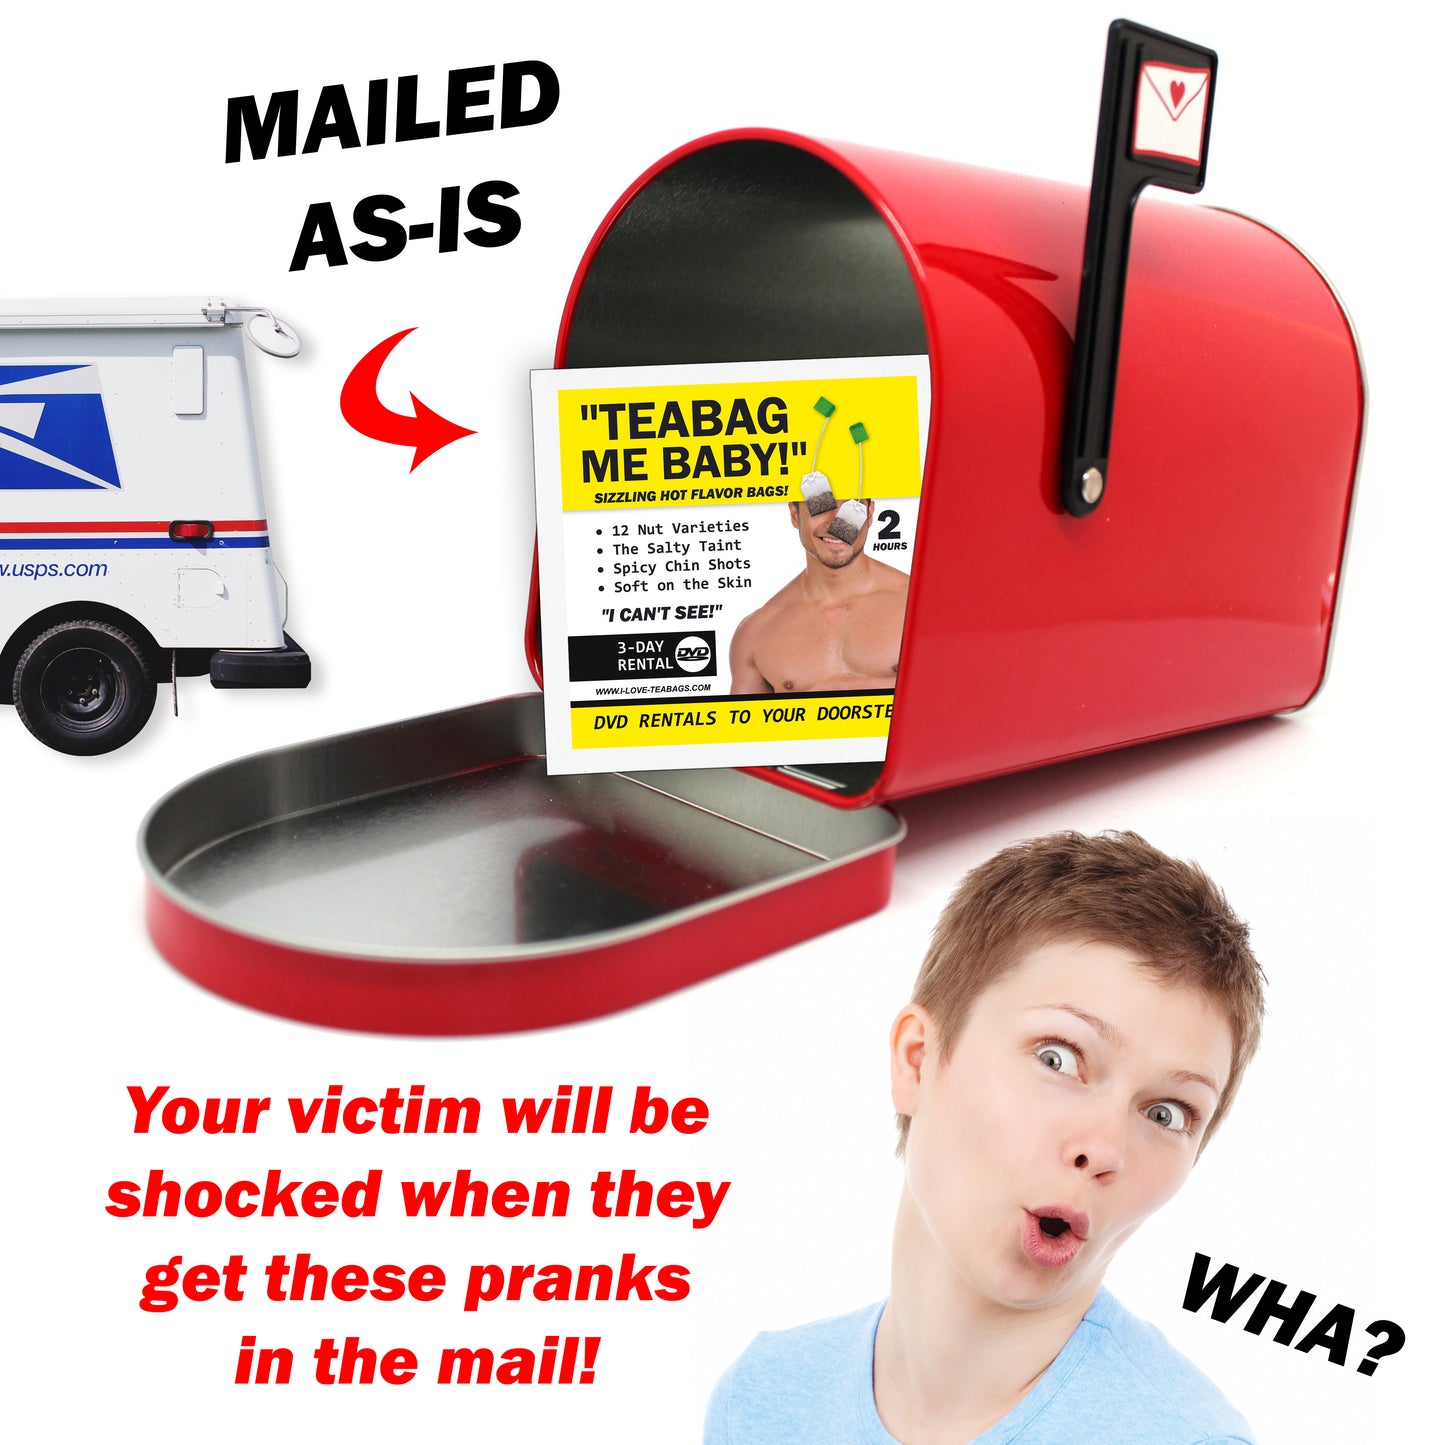 Teabag Me Baby Fake DVD mail prank gets sent directly to your victims 100% anonymously!